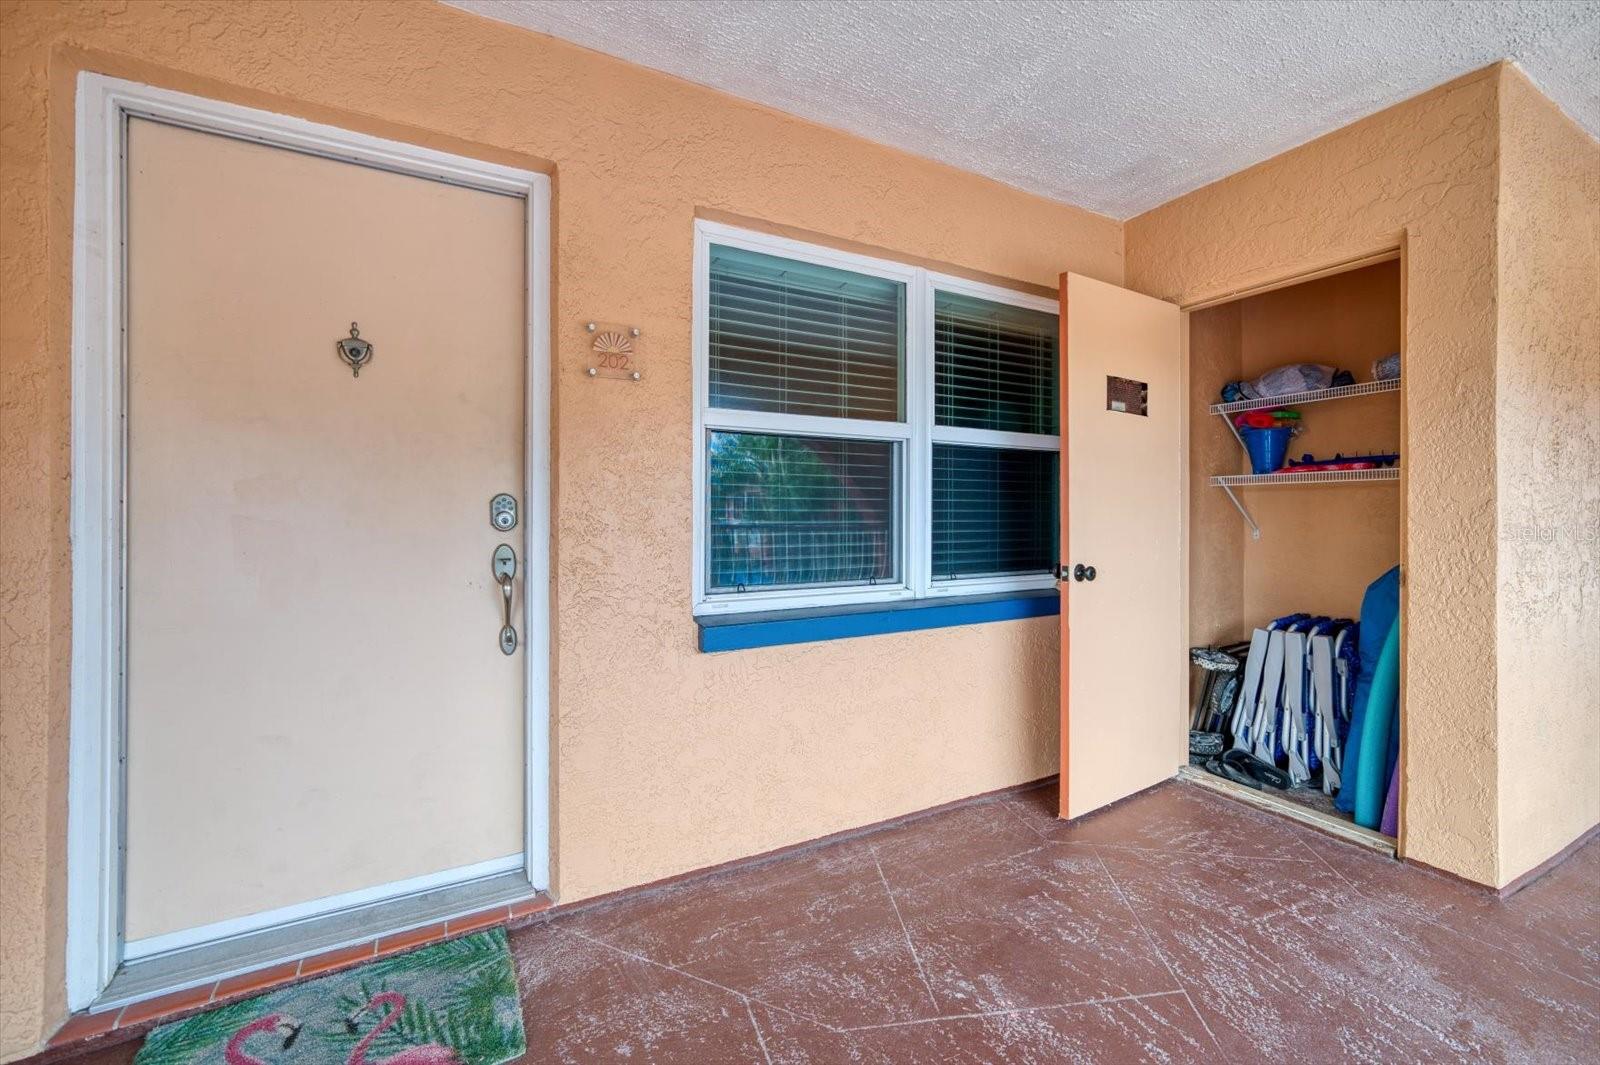 Front door and exterior storage closet. Convenient for beach chairs and umbrellas!